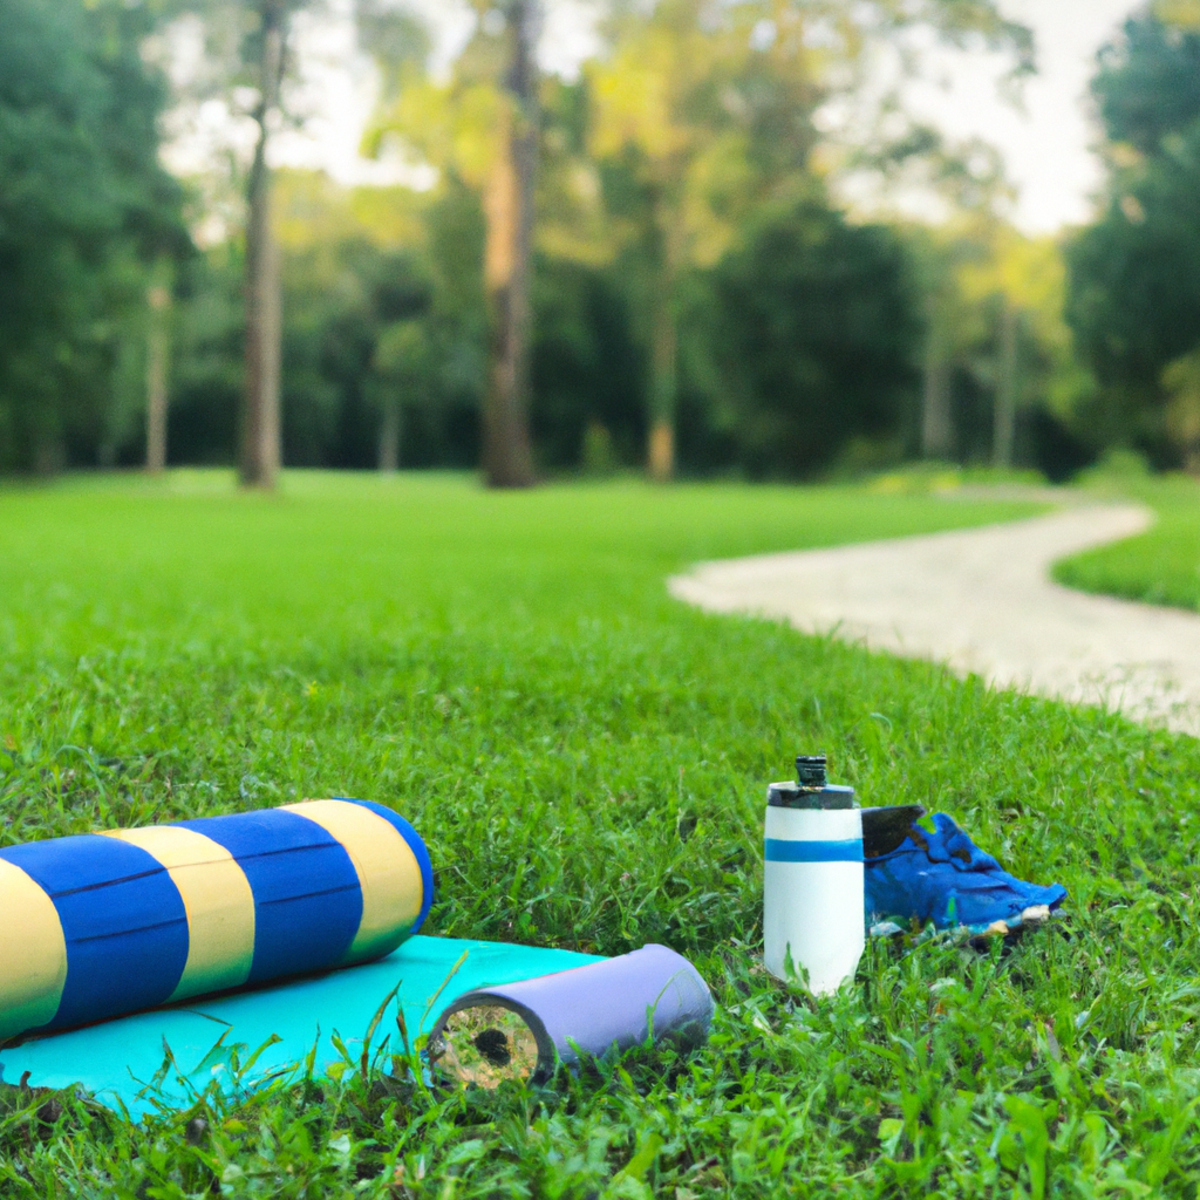 The photo captures a serene scene of a lush green park with a winding path leading into the distance. In the foreground, there is a yoga mat laid out on the grass with a water bottle and a pair of running shoes placed neatly beside it. A set of resistance bands and a foam roller are also visible, suggesting a well-rounded workout routine. The natural light filtering through the trees creates a warm and inviting atmosphere, inviting the viewer to step into the picture and experience the mental and physical benefits of outdoor fitness.